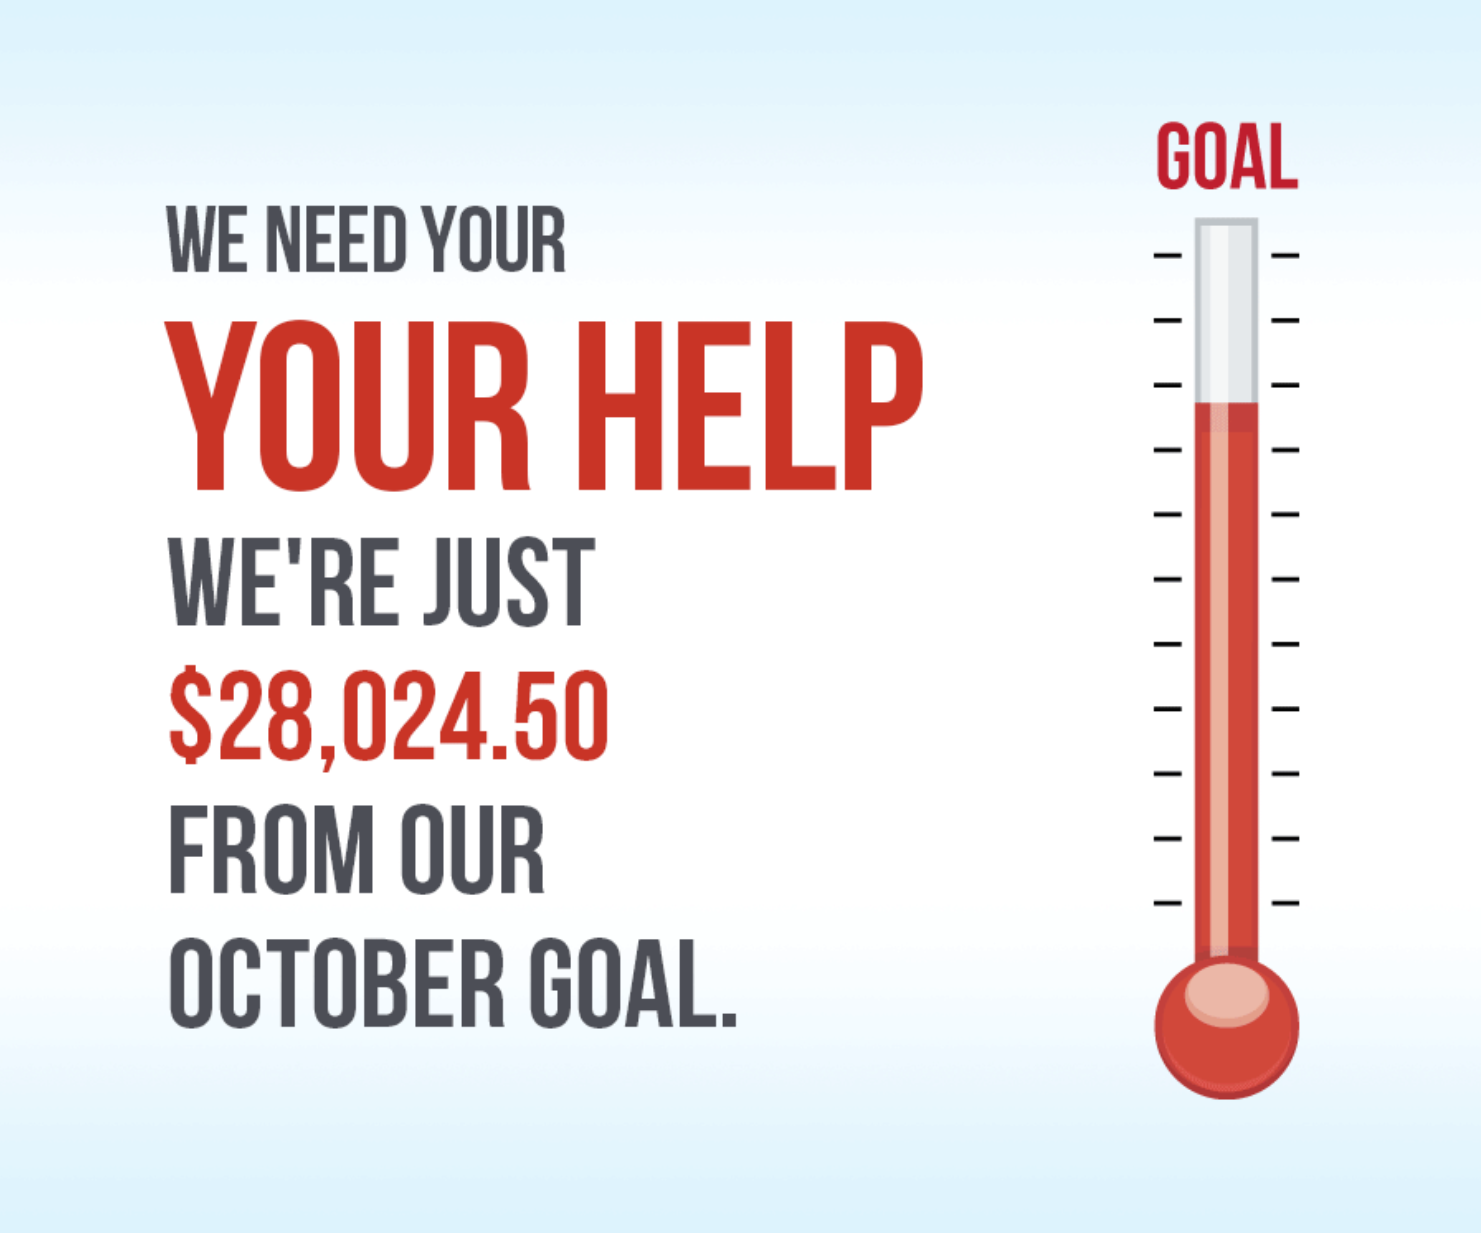 We're almost there, help us reach our goal! – IMANA